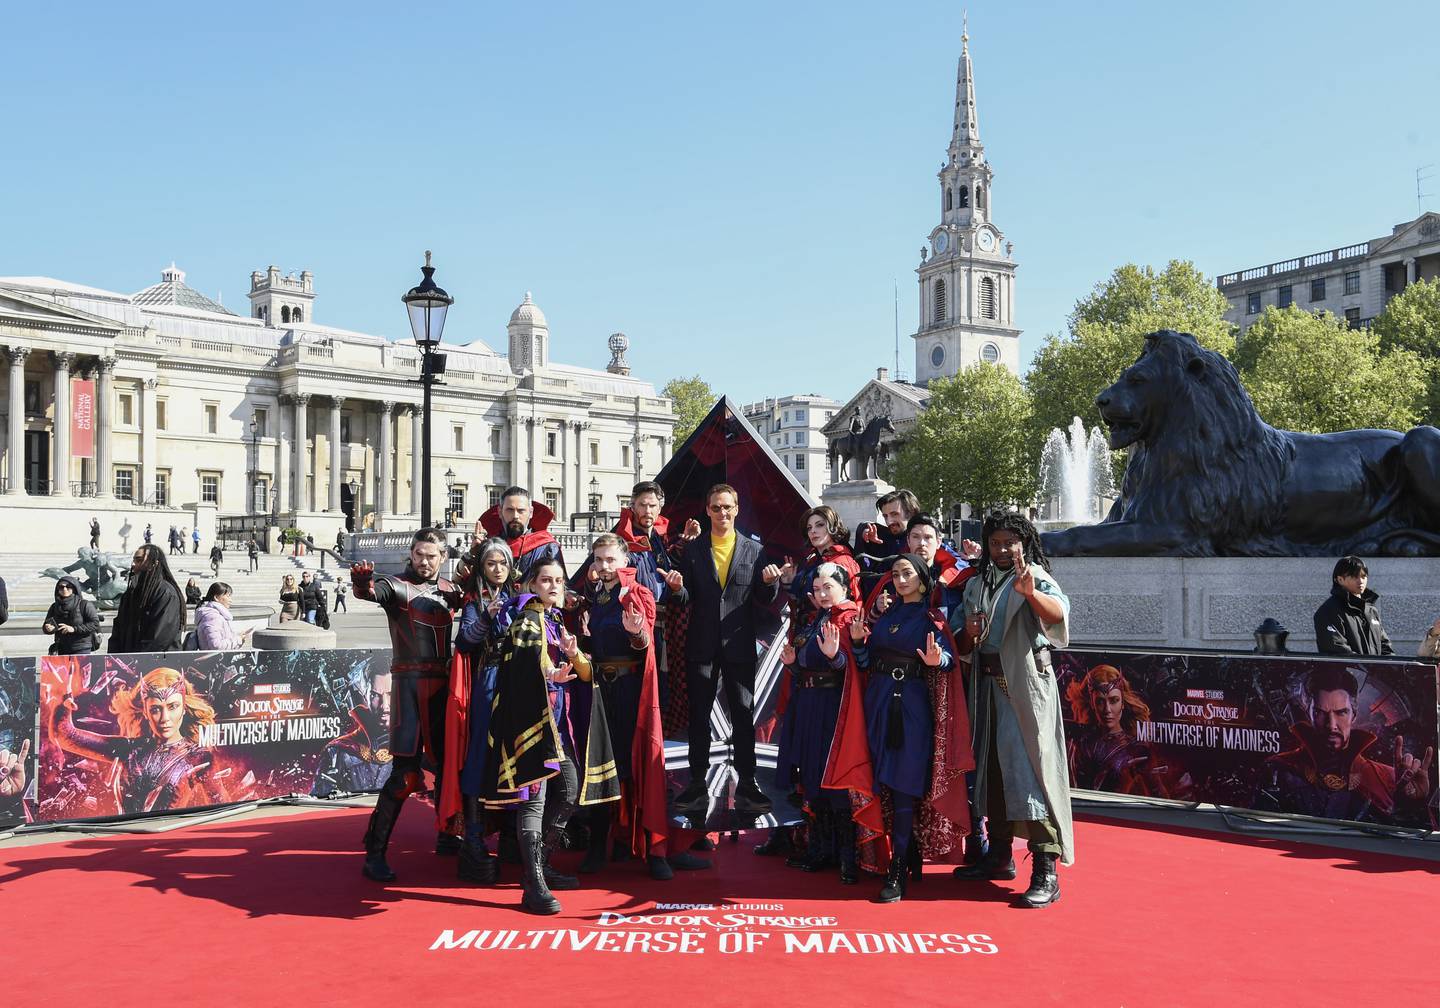 Benedict Cumberbatch with cosplayers while promoting his new film, Marvel Studios' 'Doctor Strange in the Multiverse of Madness', in Trafalgar Square, London. Getty Images